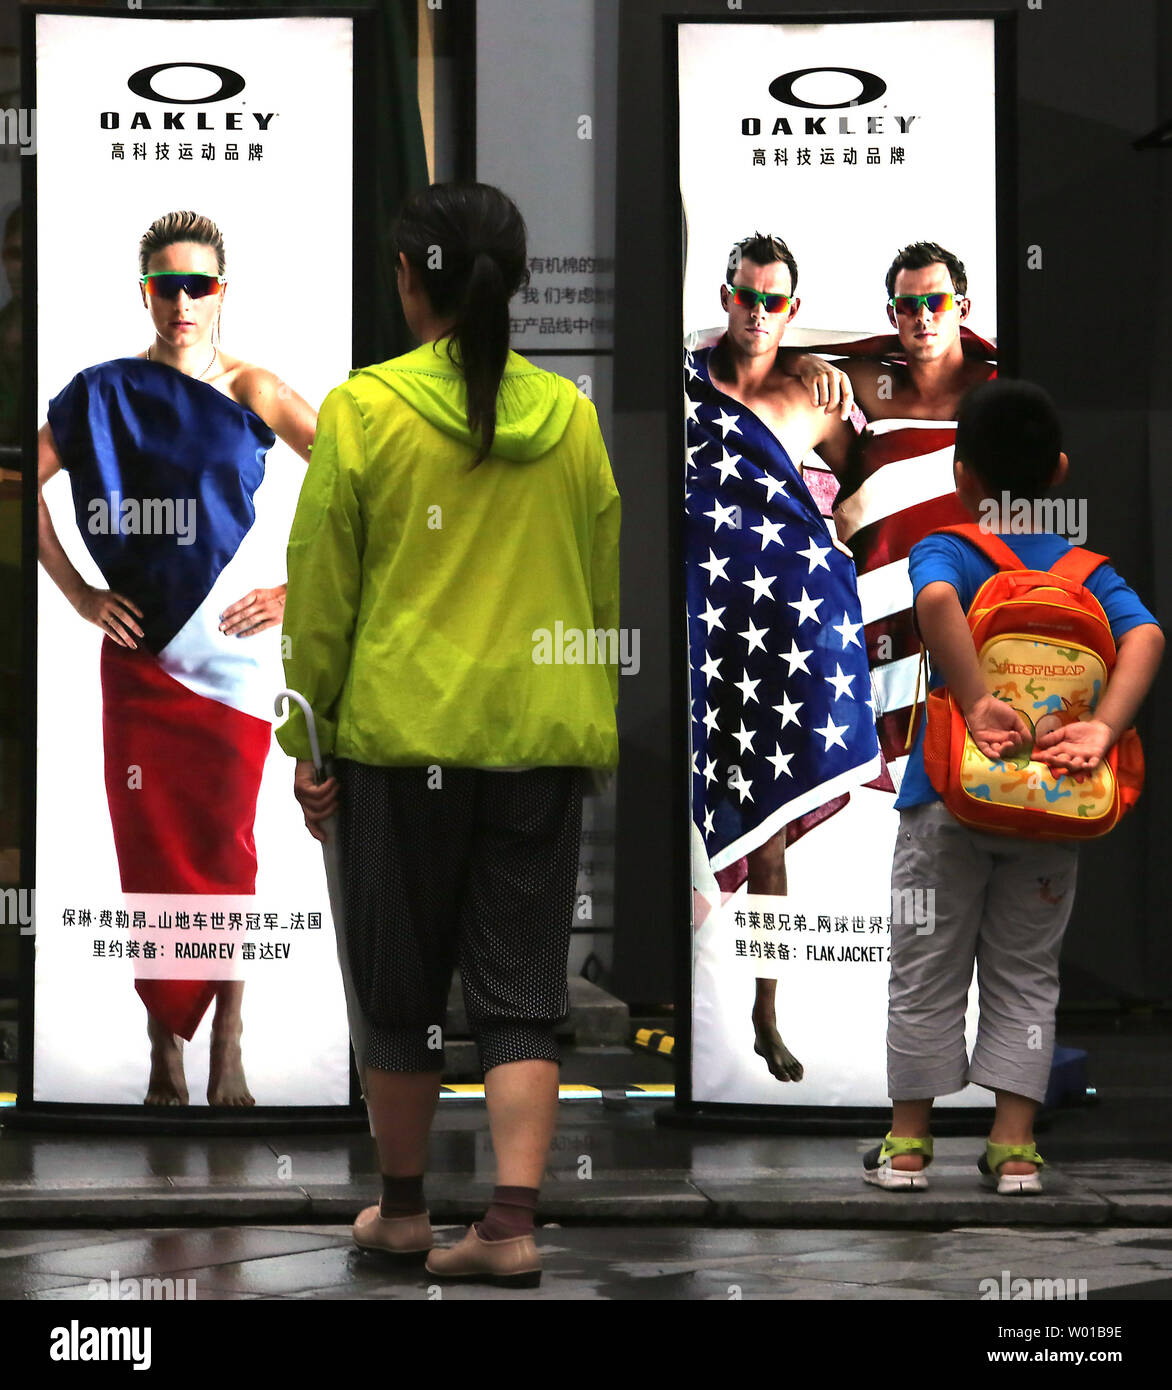 A Chinese woman and her son look at a series of Oakley sunglasses  advertisements featuring Olympic athletes wrapped in their country's flag  in Beijing on July 23, 2016. Oakley, a California-based sporting